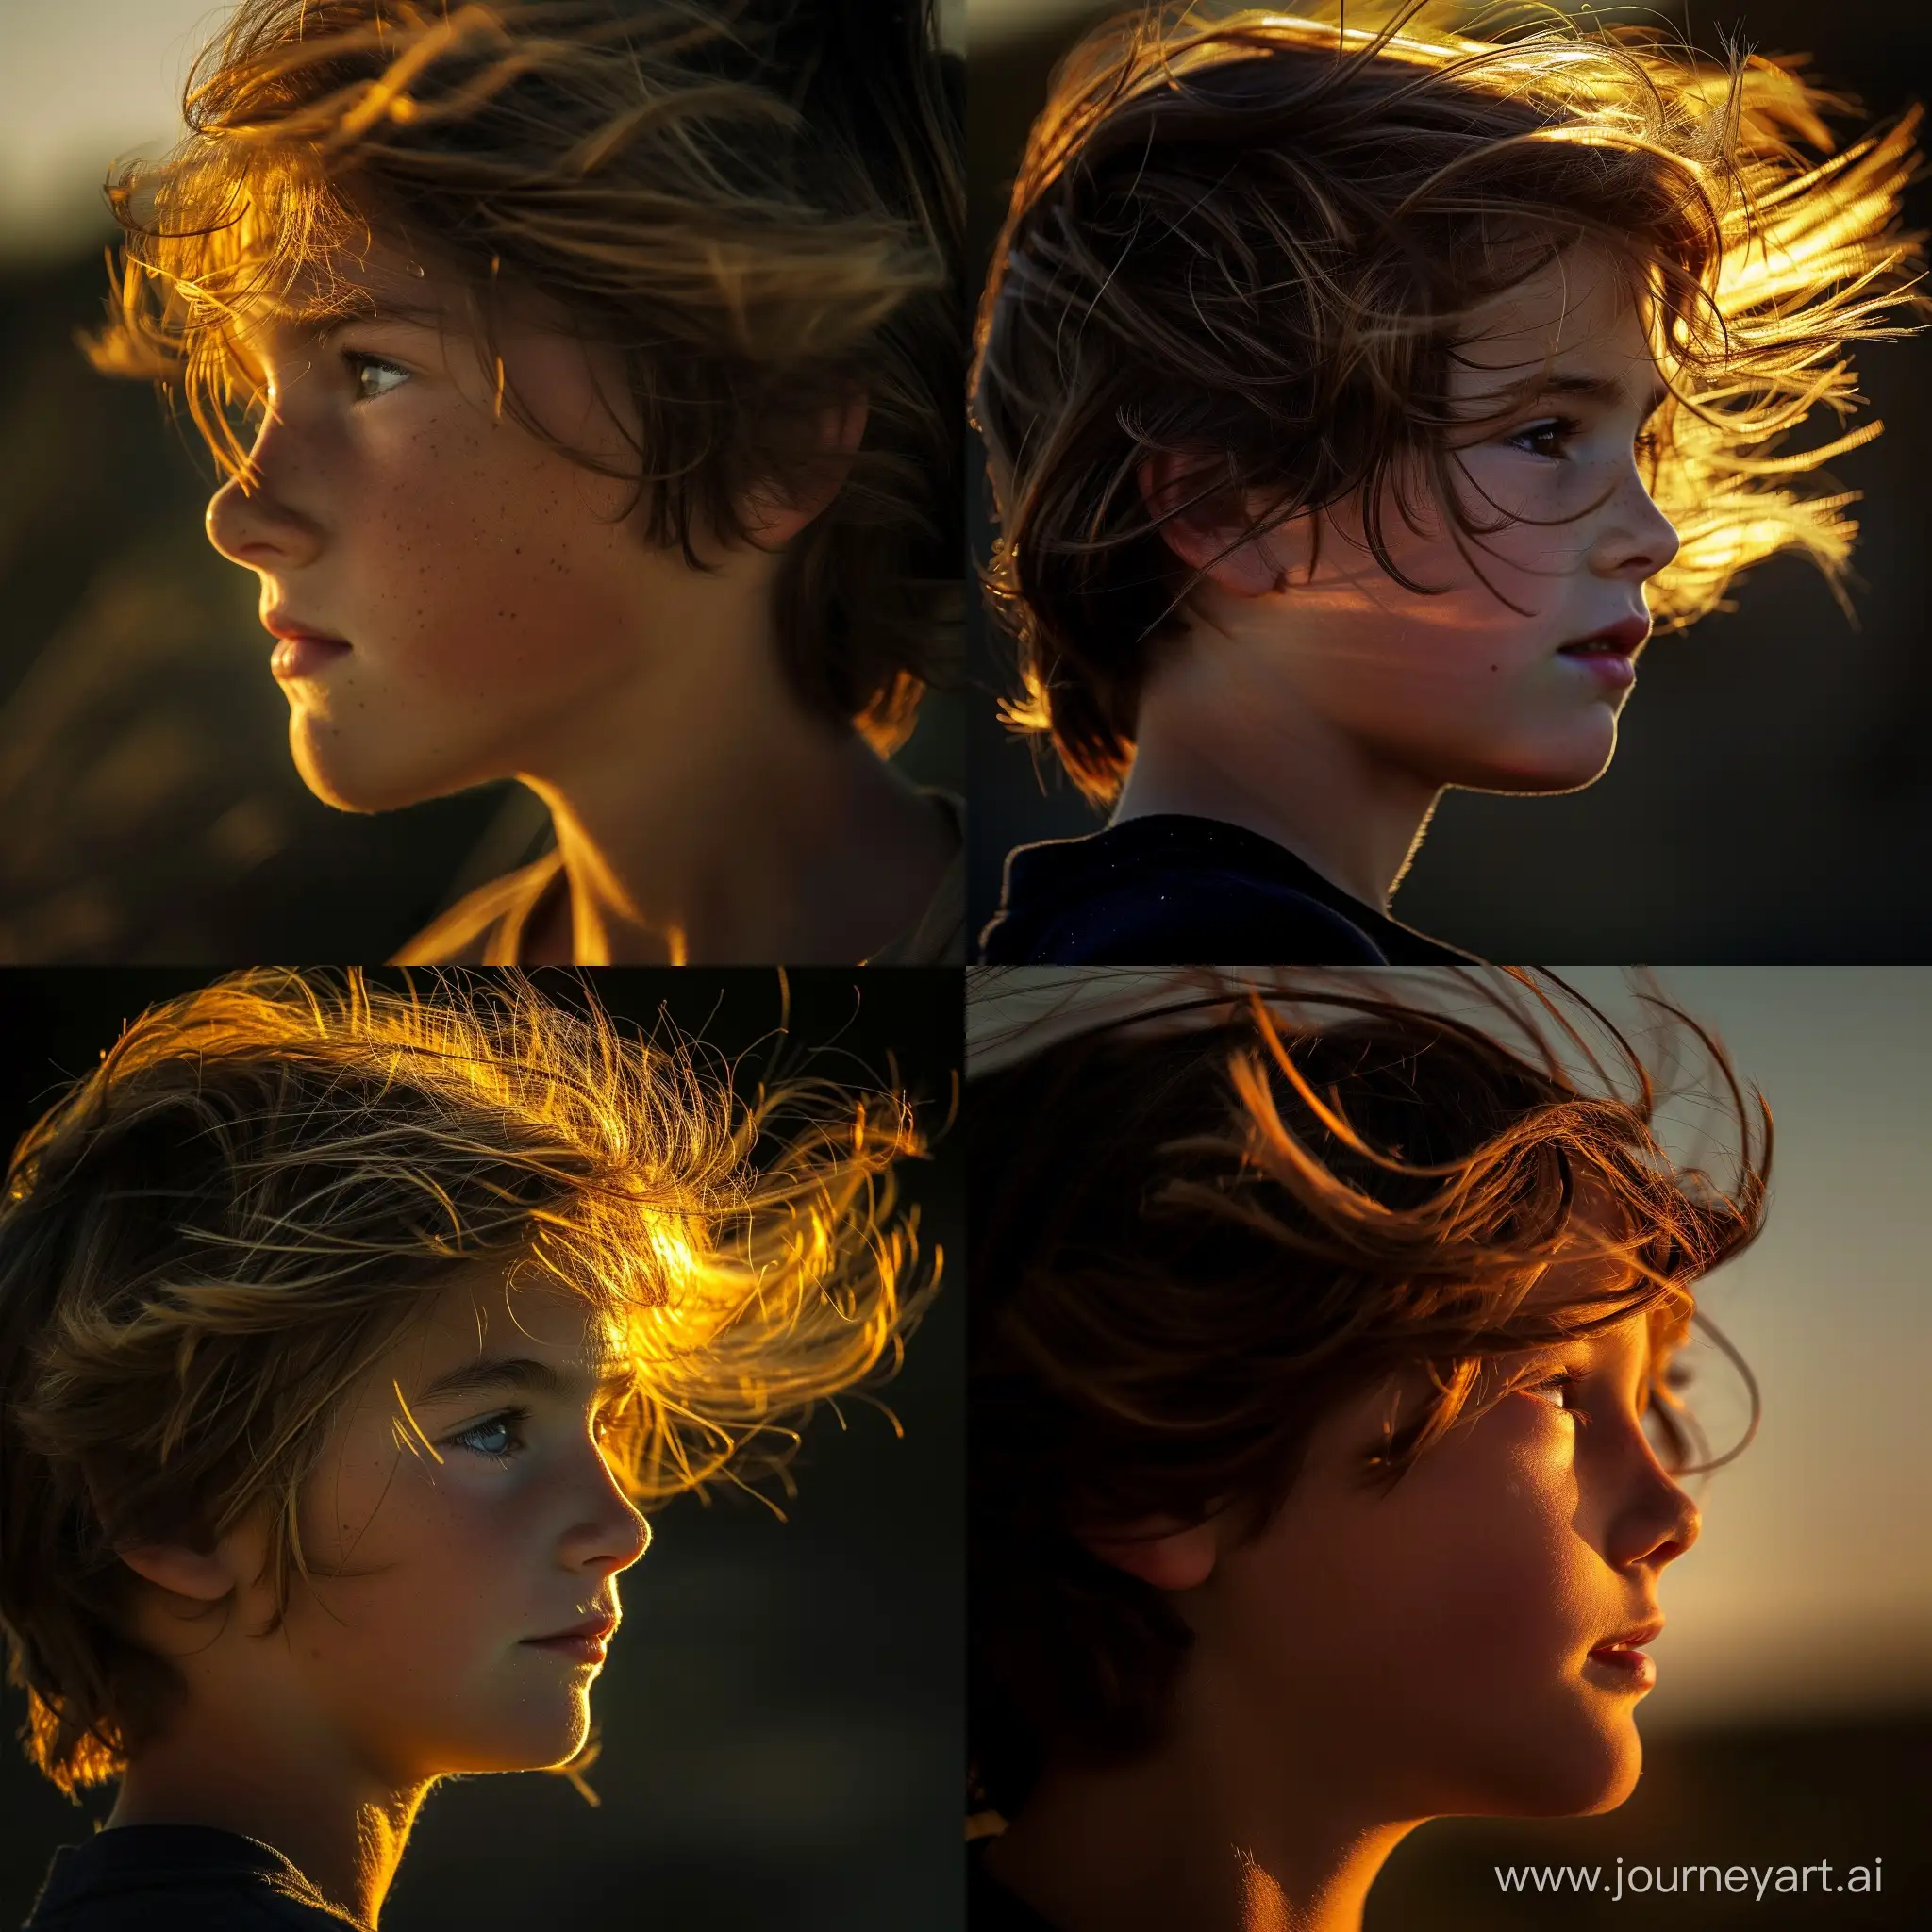 Captivating-Portrait-of-an-11YearOld-Boy-in-the-Golden-Sunlight